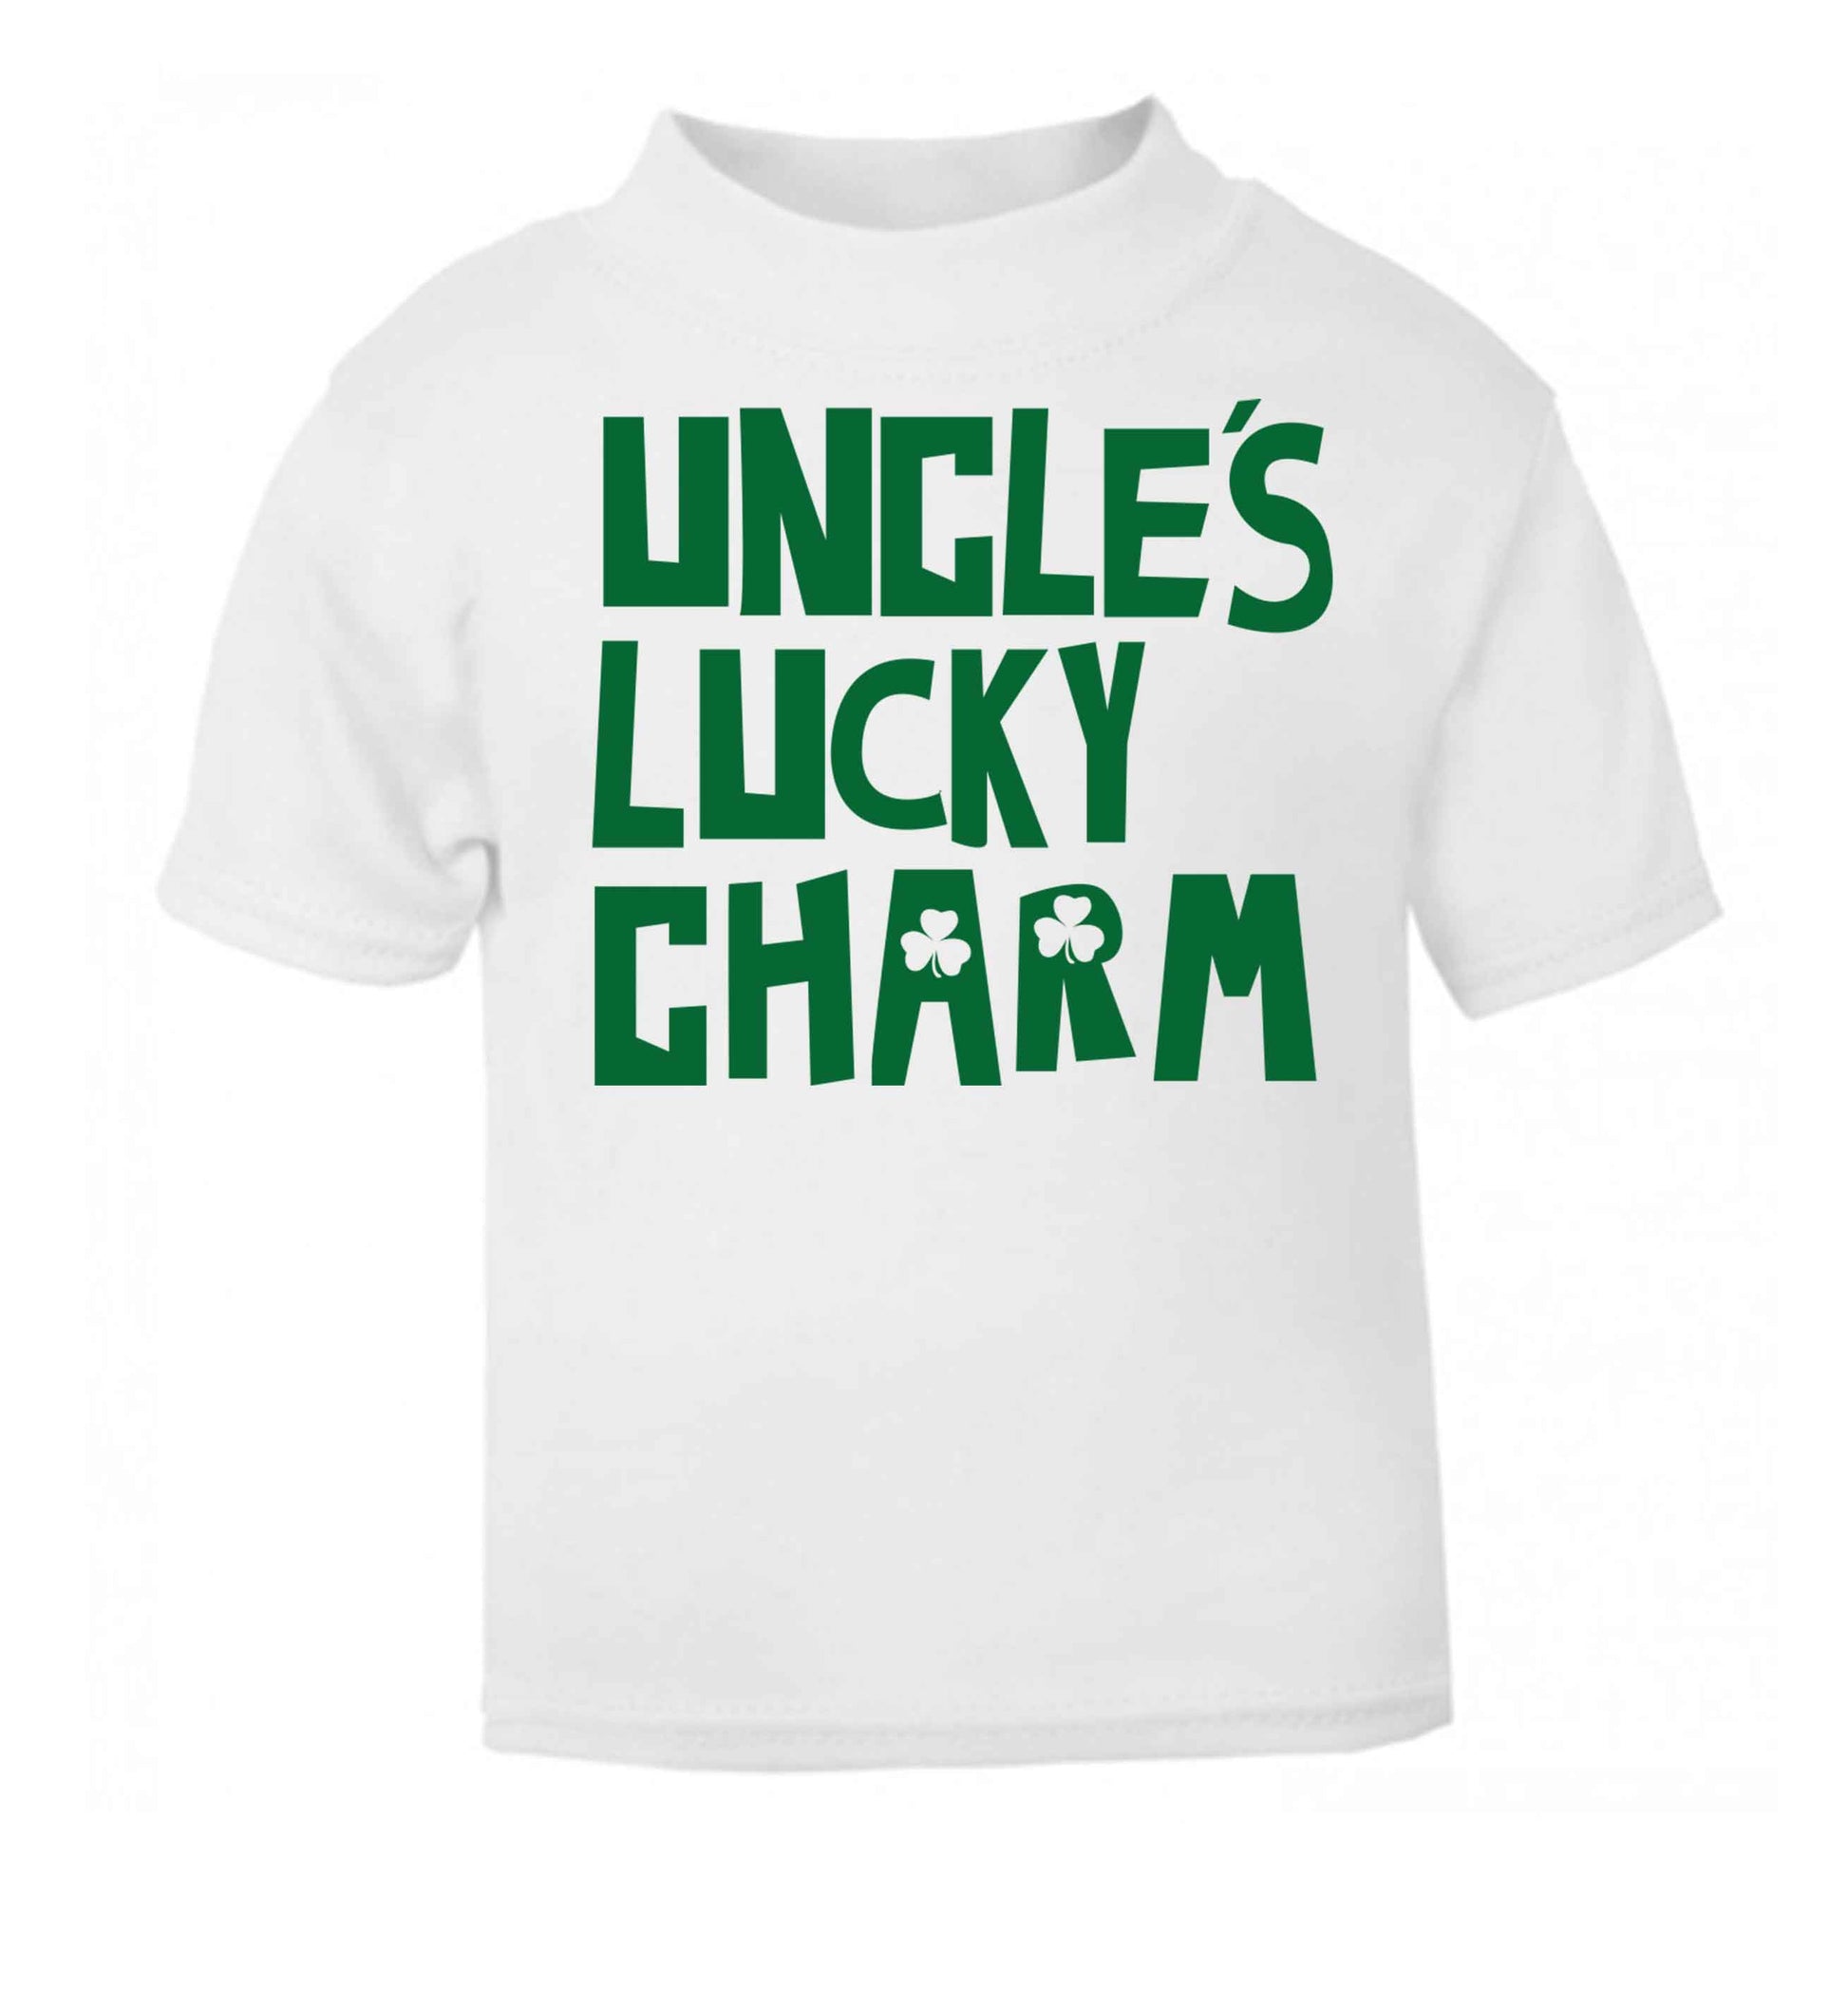 Uncles lucky charm white baby toddler Tshirt 2 Years